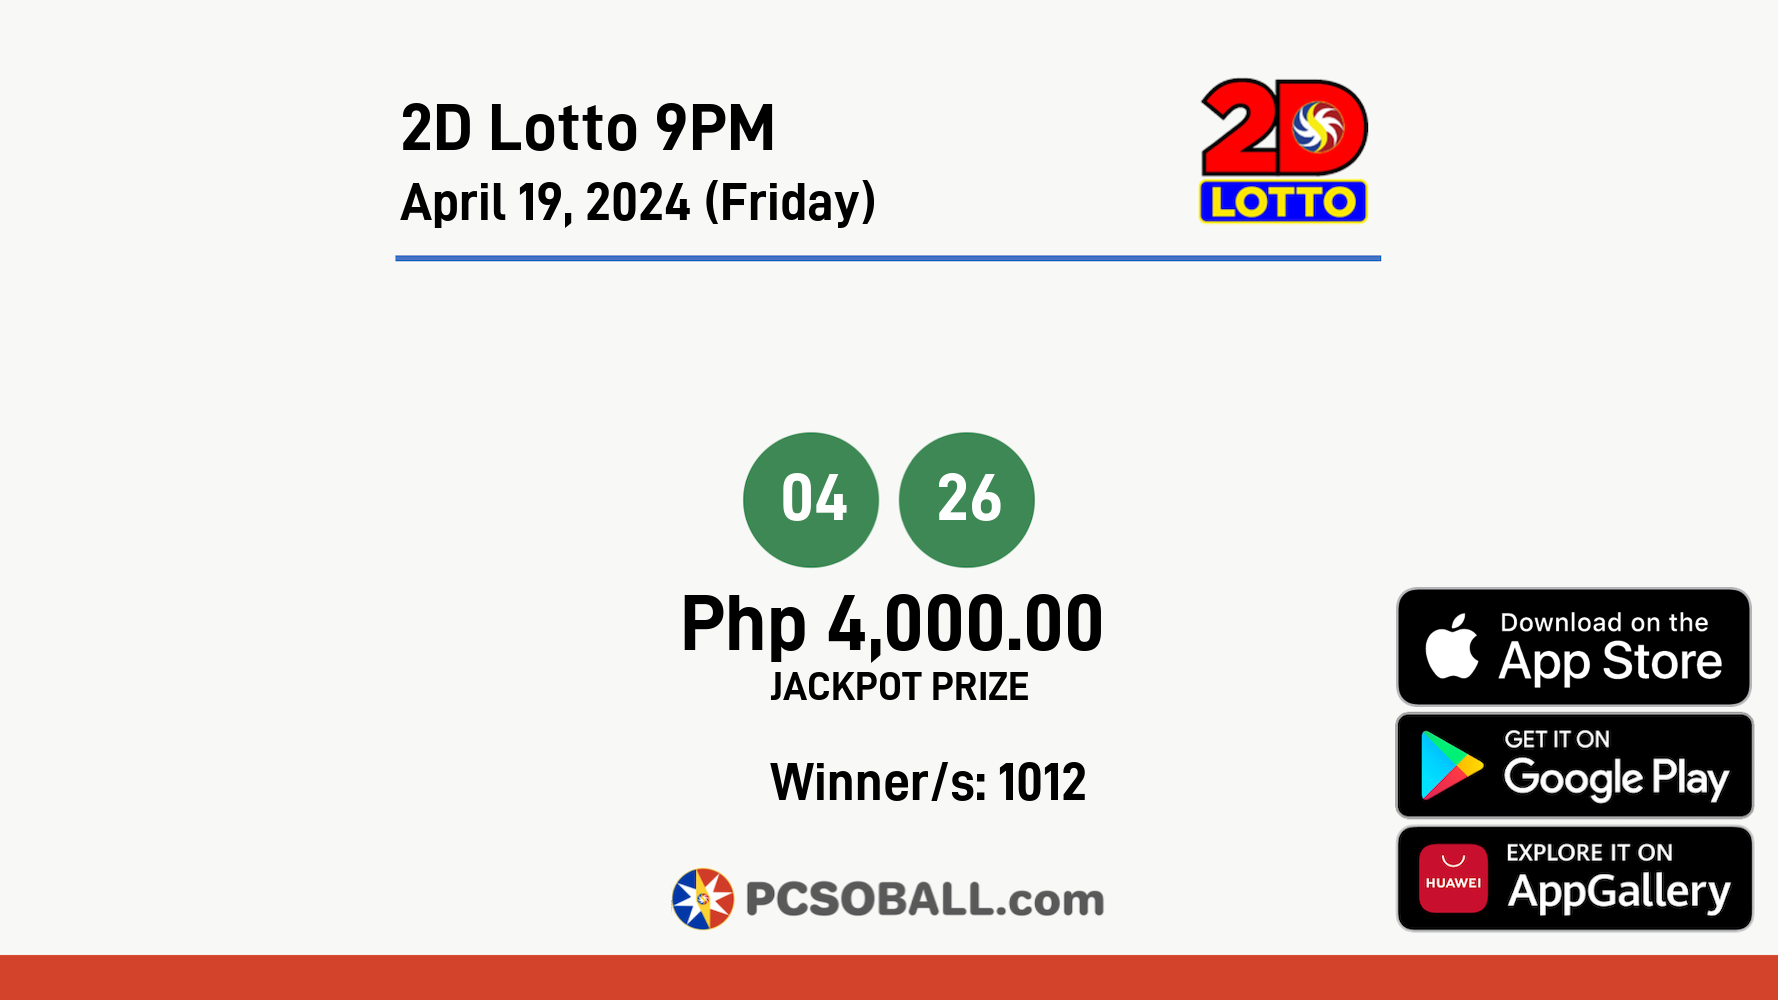 2D Lotto 9PM April 19, 2024 (Friday) Result